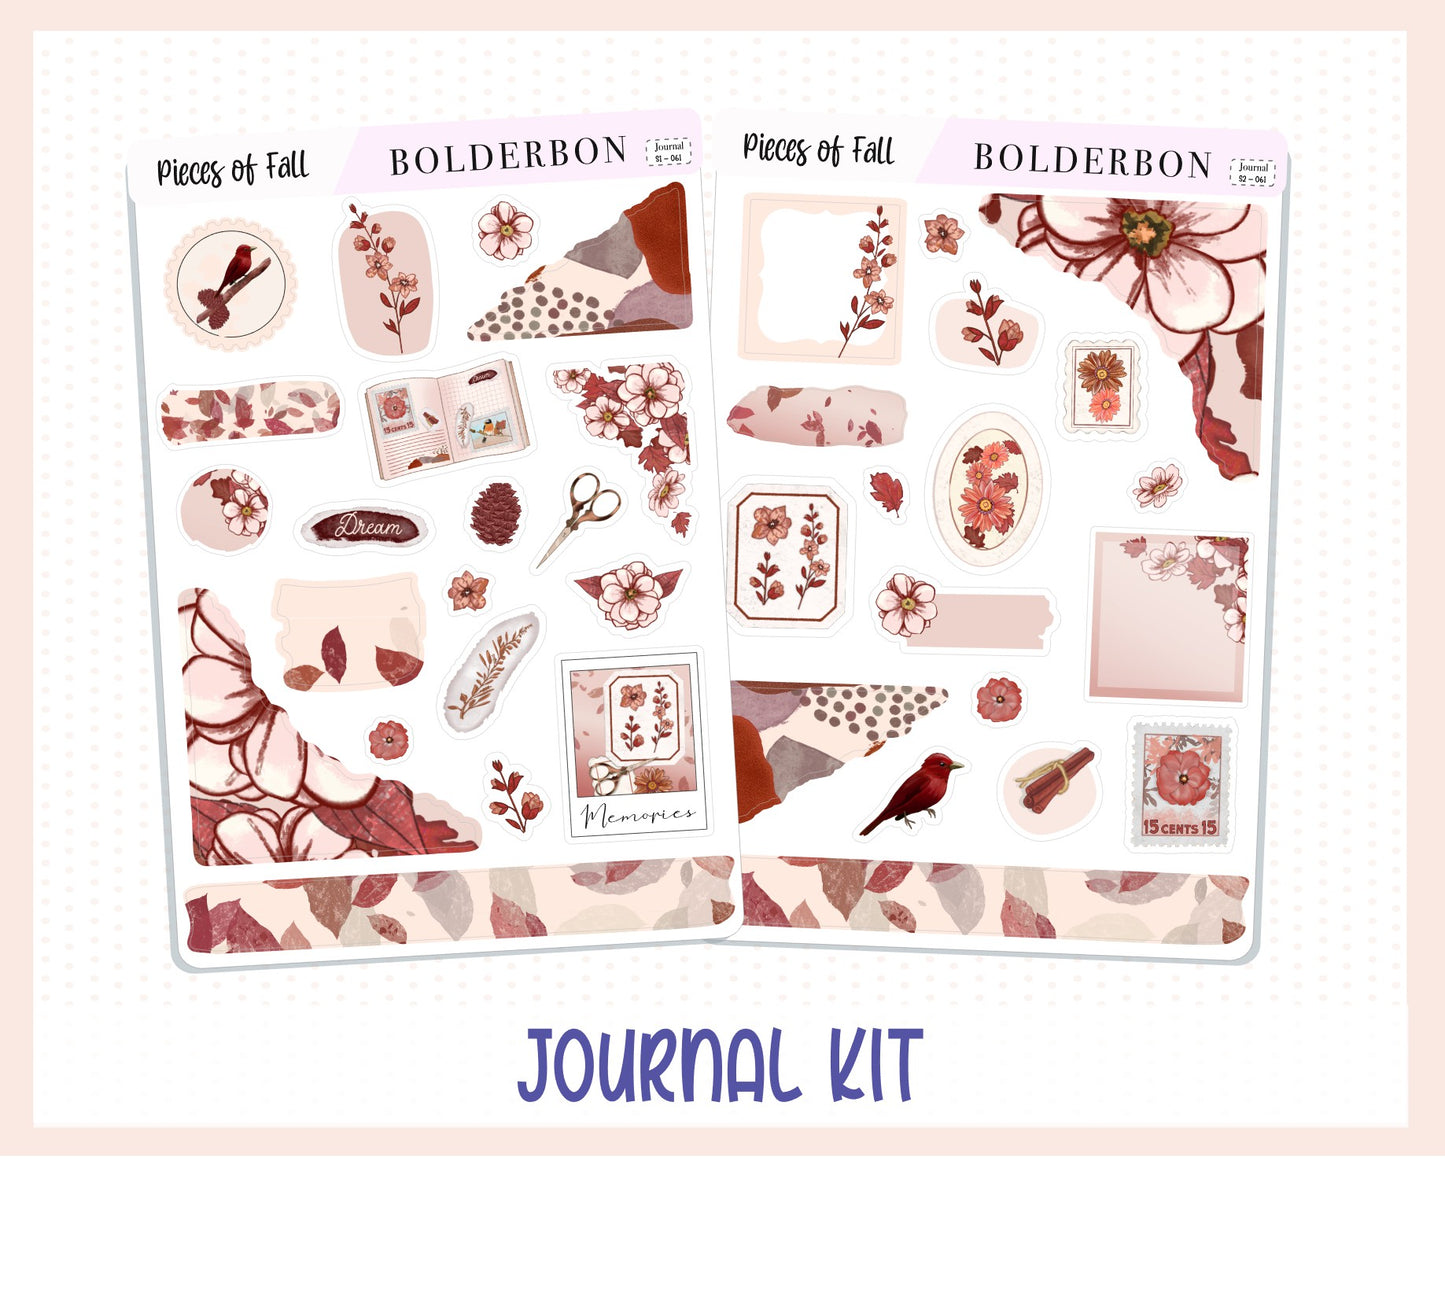 PIECES OF FALL Journal Sticker Kit || Fall Stickers, Autumn Stickers, Journaling Stickers, Book Stickers